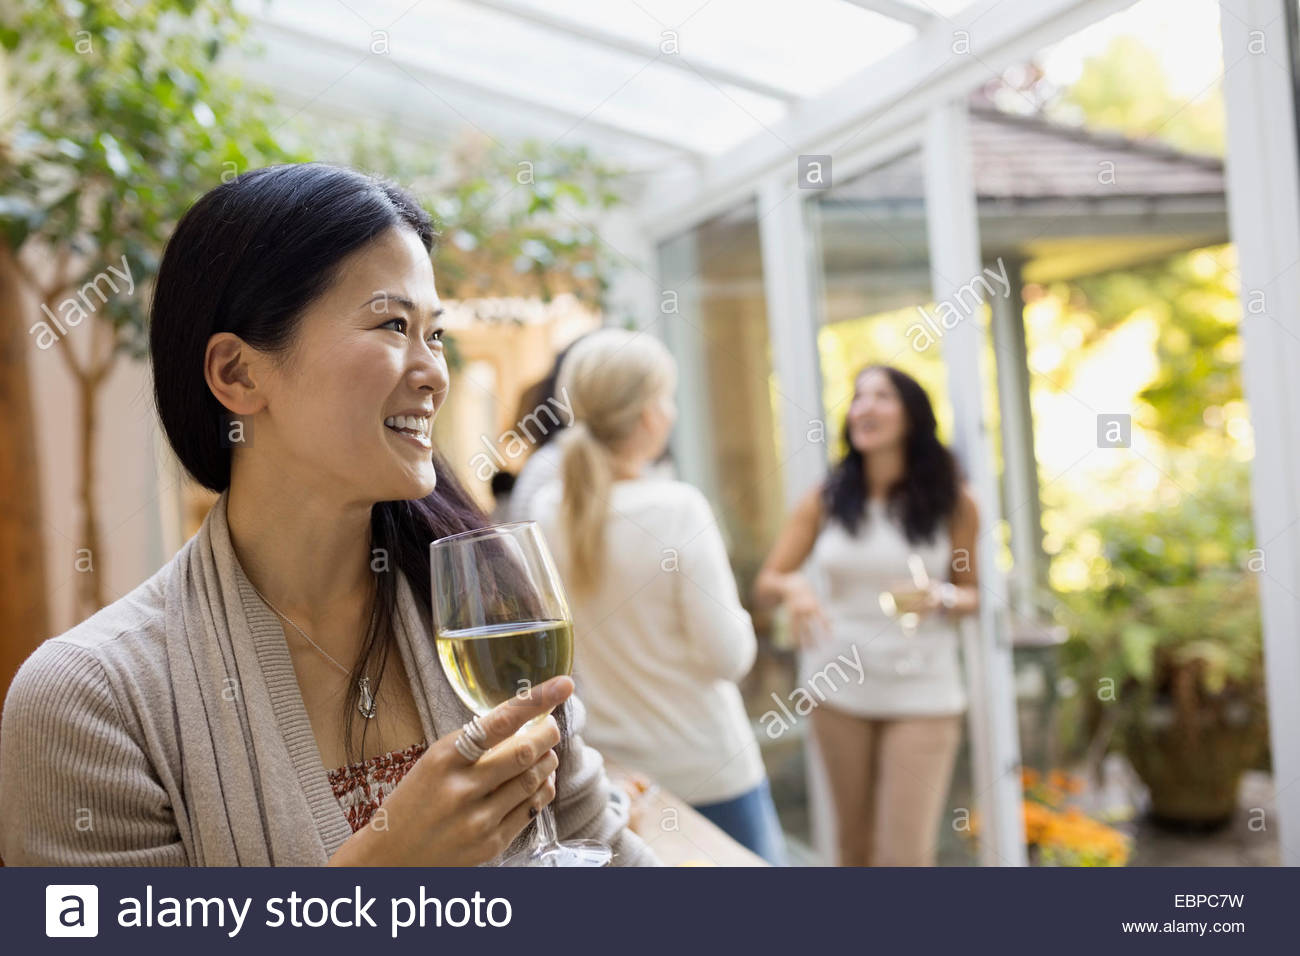 Woman enjoying white wine Banque D'Images